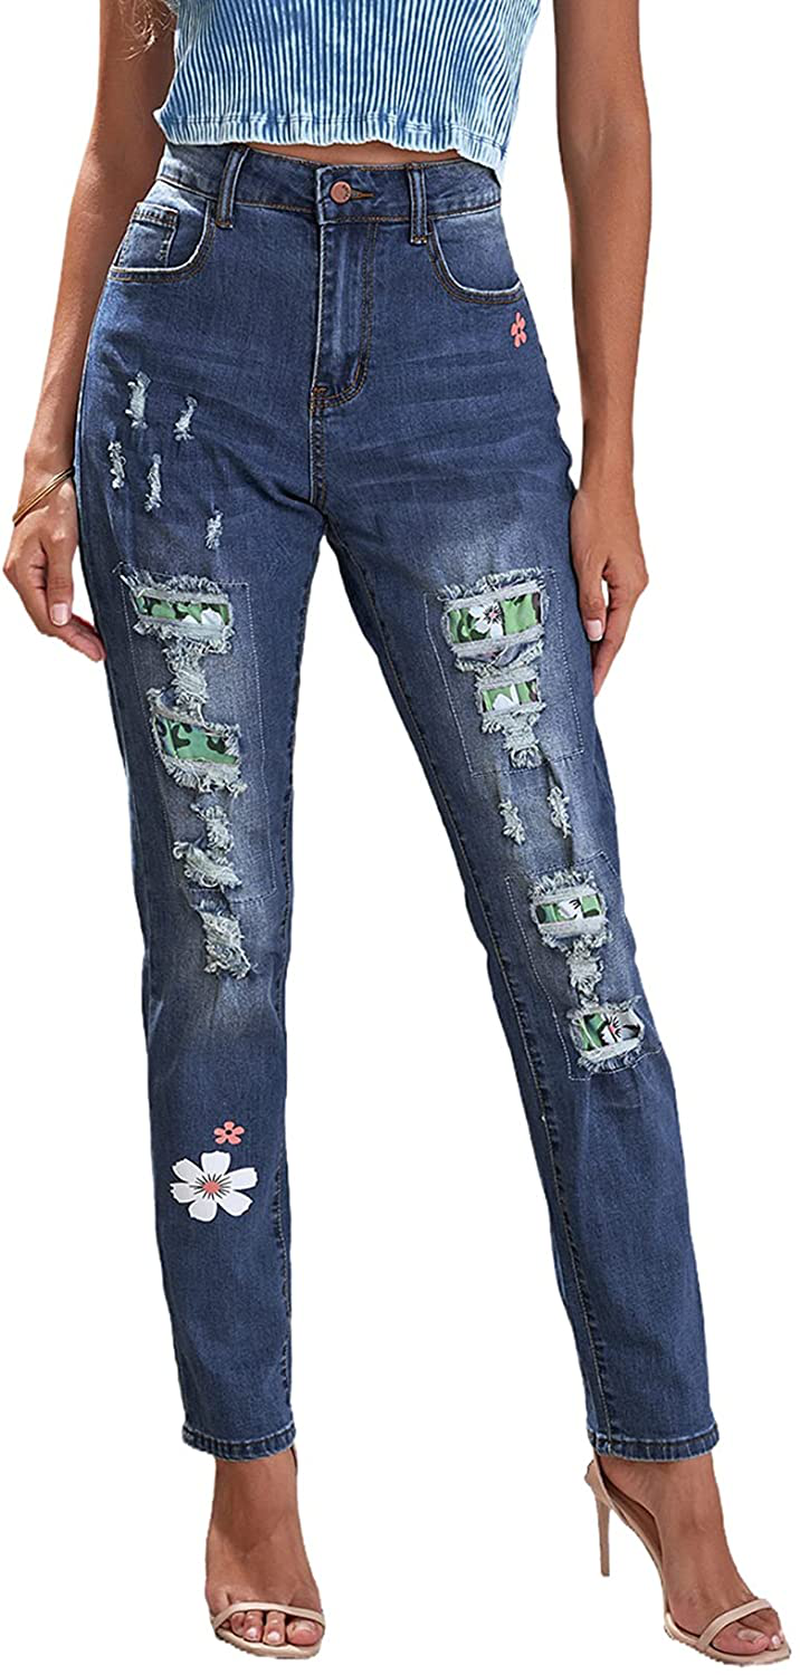 Dokotoo Women High Waisted Distressed Skinny Jeans Stretchy Ripped Hole Denim Pants